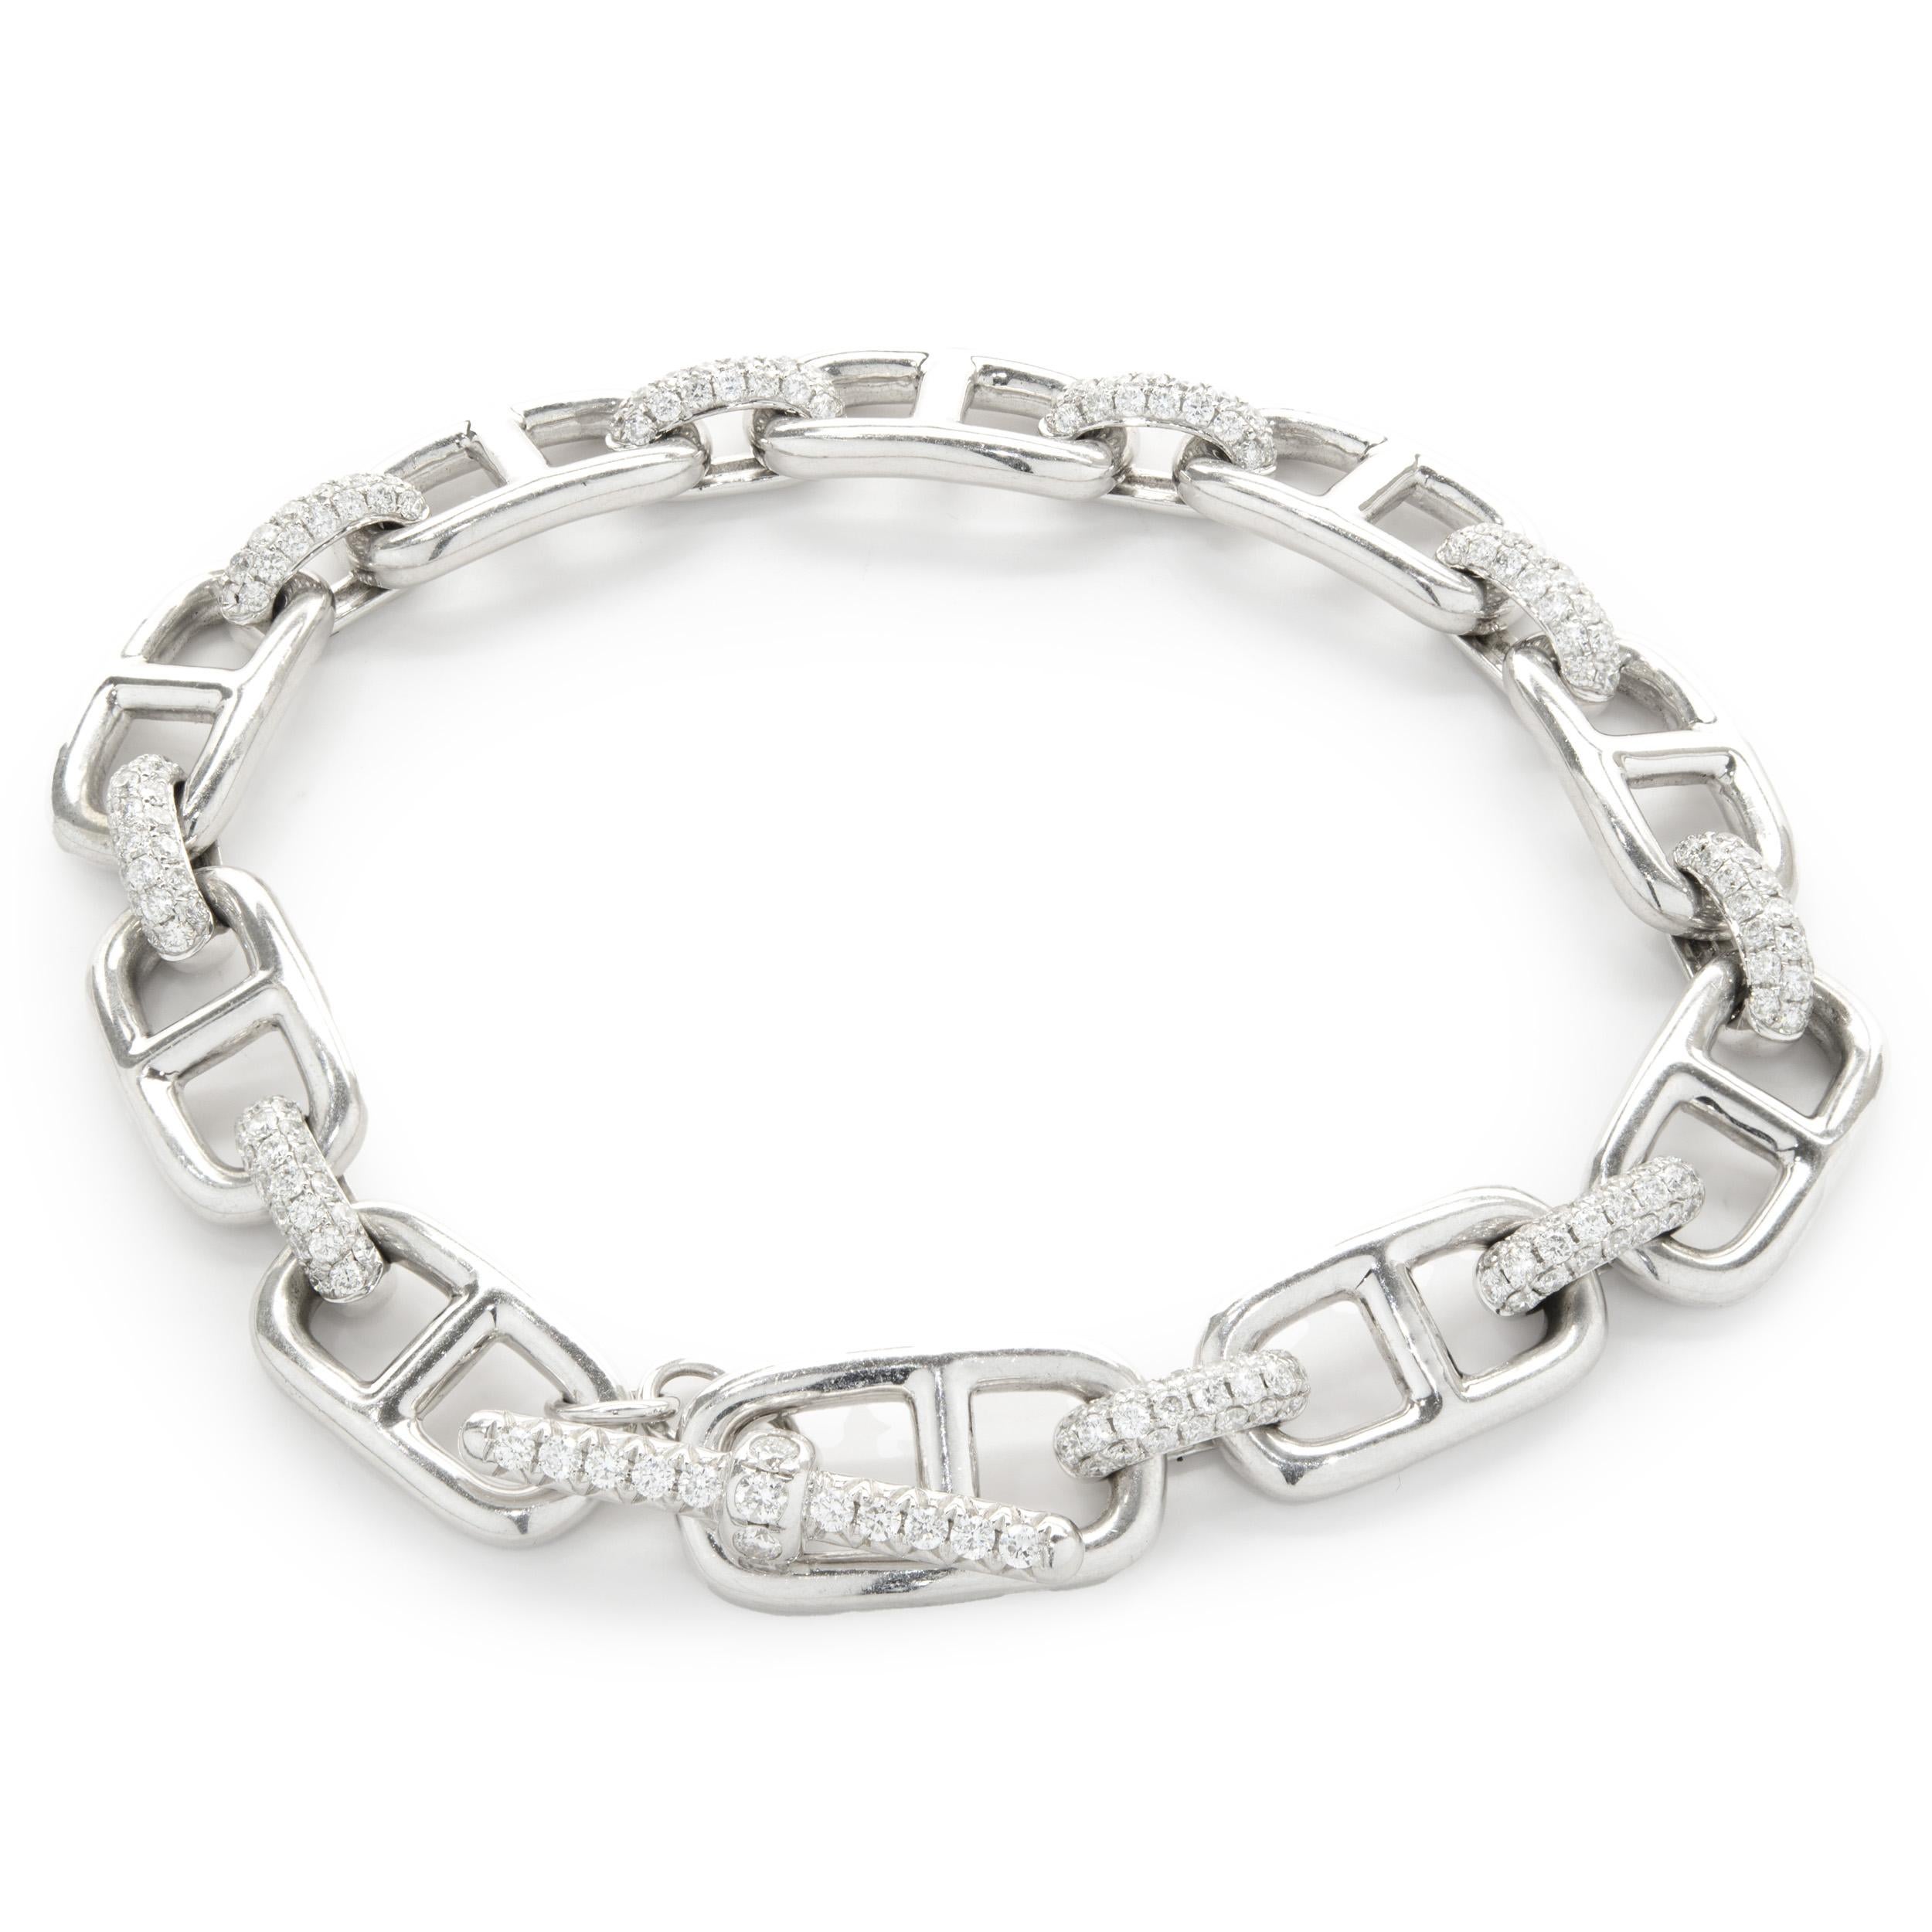 Designer: custom design
Material: 18K white gold
Diamonds: 213 round brilliant cut = 1.83cttw
Color: G
Clarity: VS2
Dimensions: bracelet will fit up to a 7.5-inch wrist
Weight: 23.62 grams
